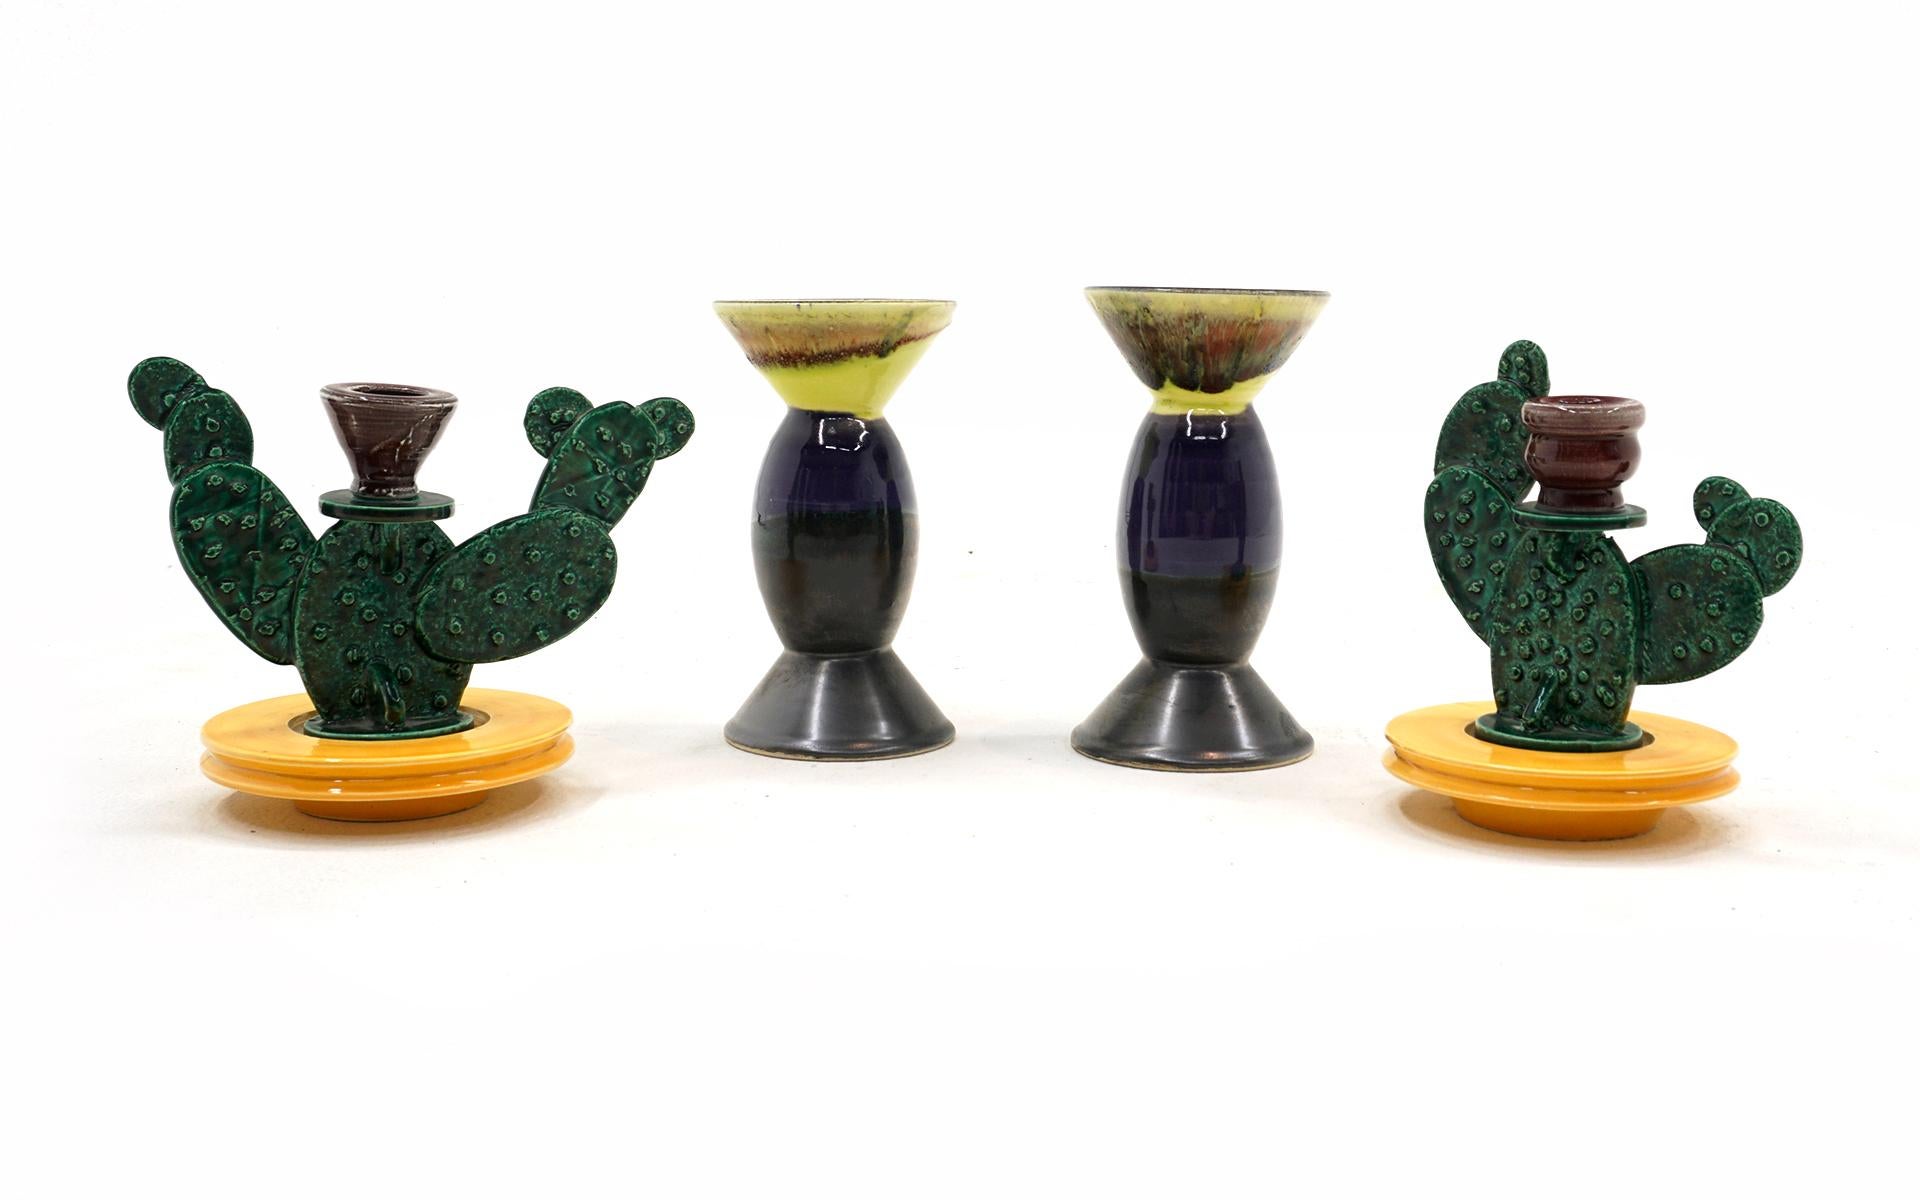 Post-Modern Ceramic Cactus Candlesticks by Peter Shire. Signed EXP 2000.  Mint Condition. For Sale